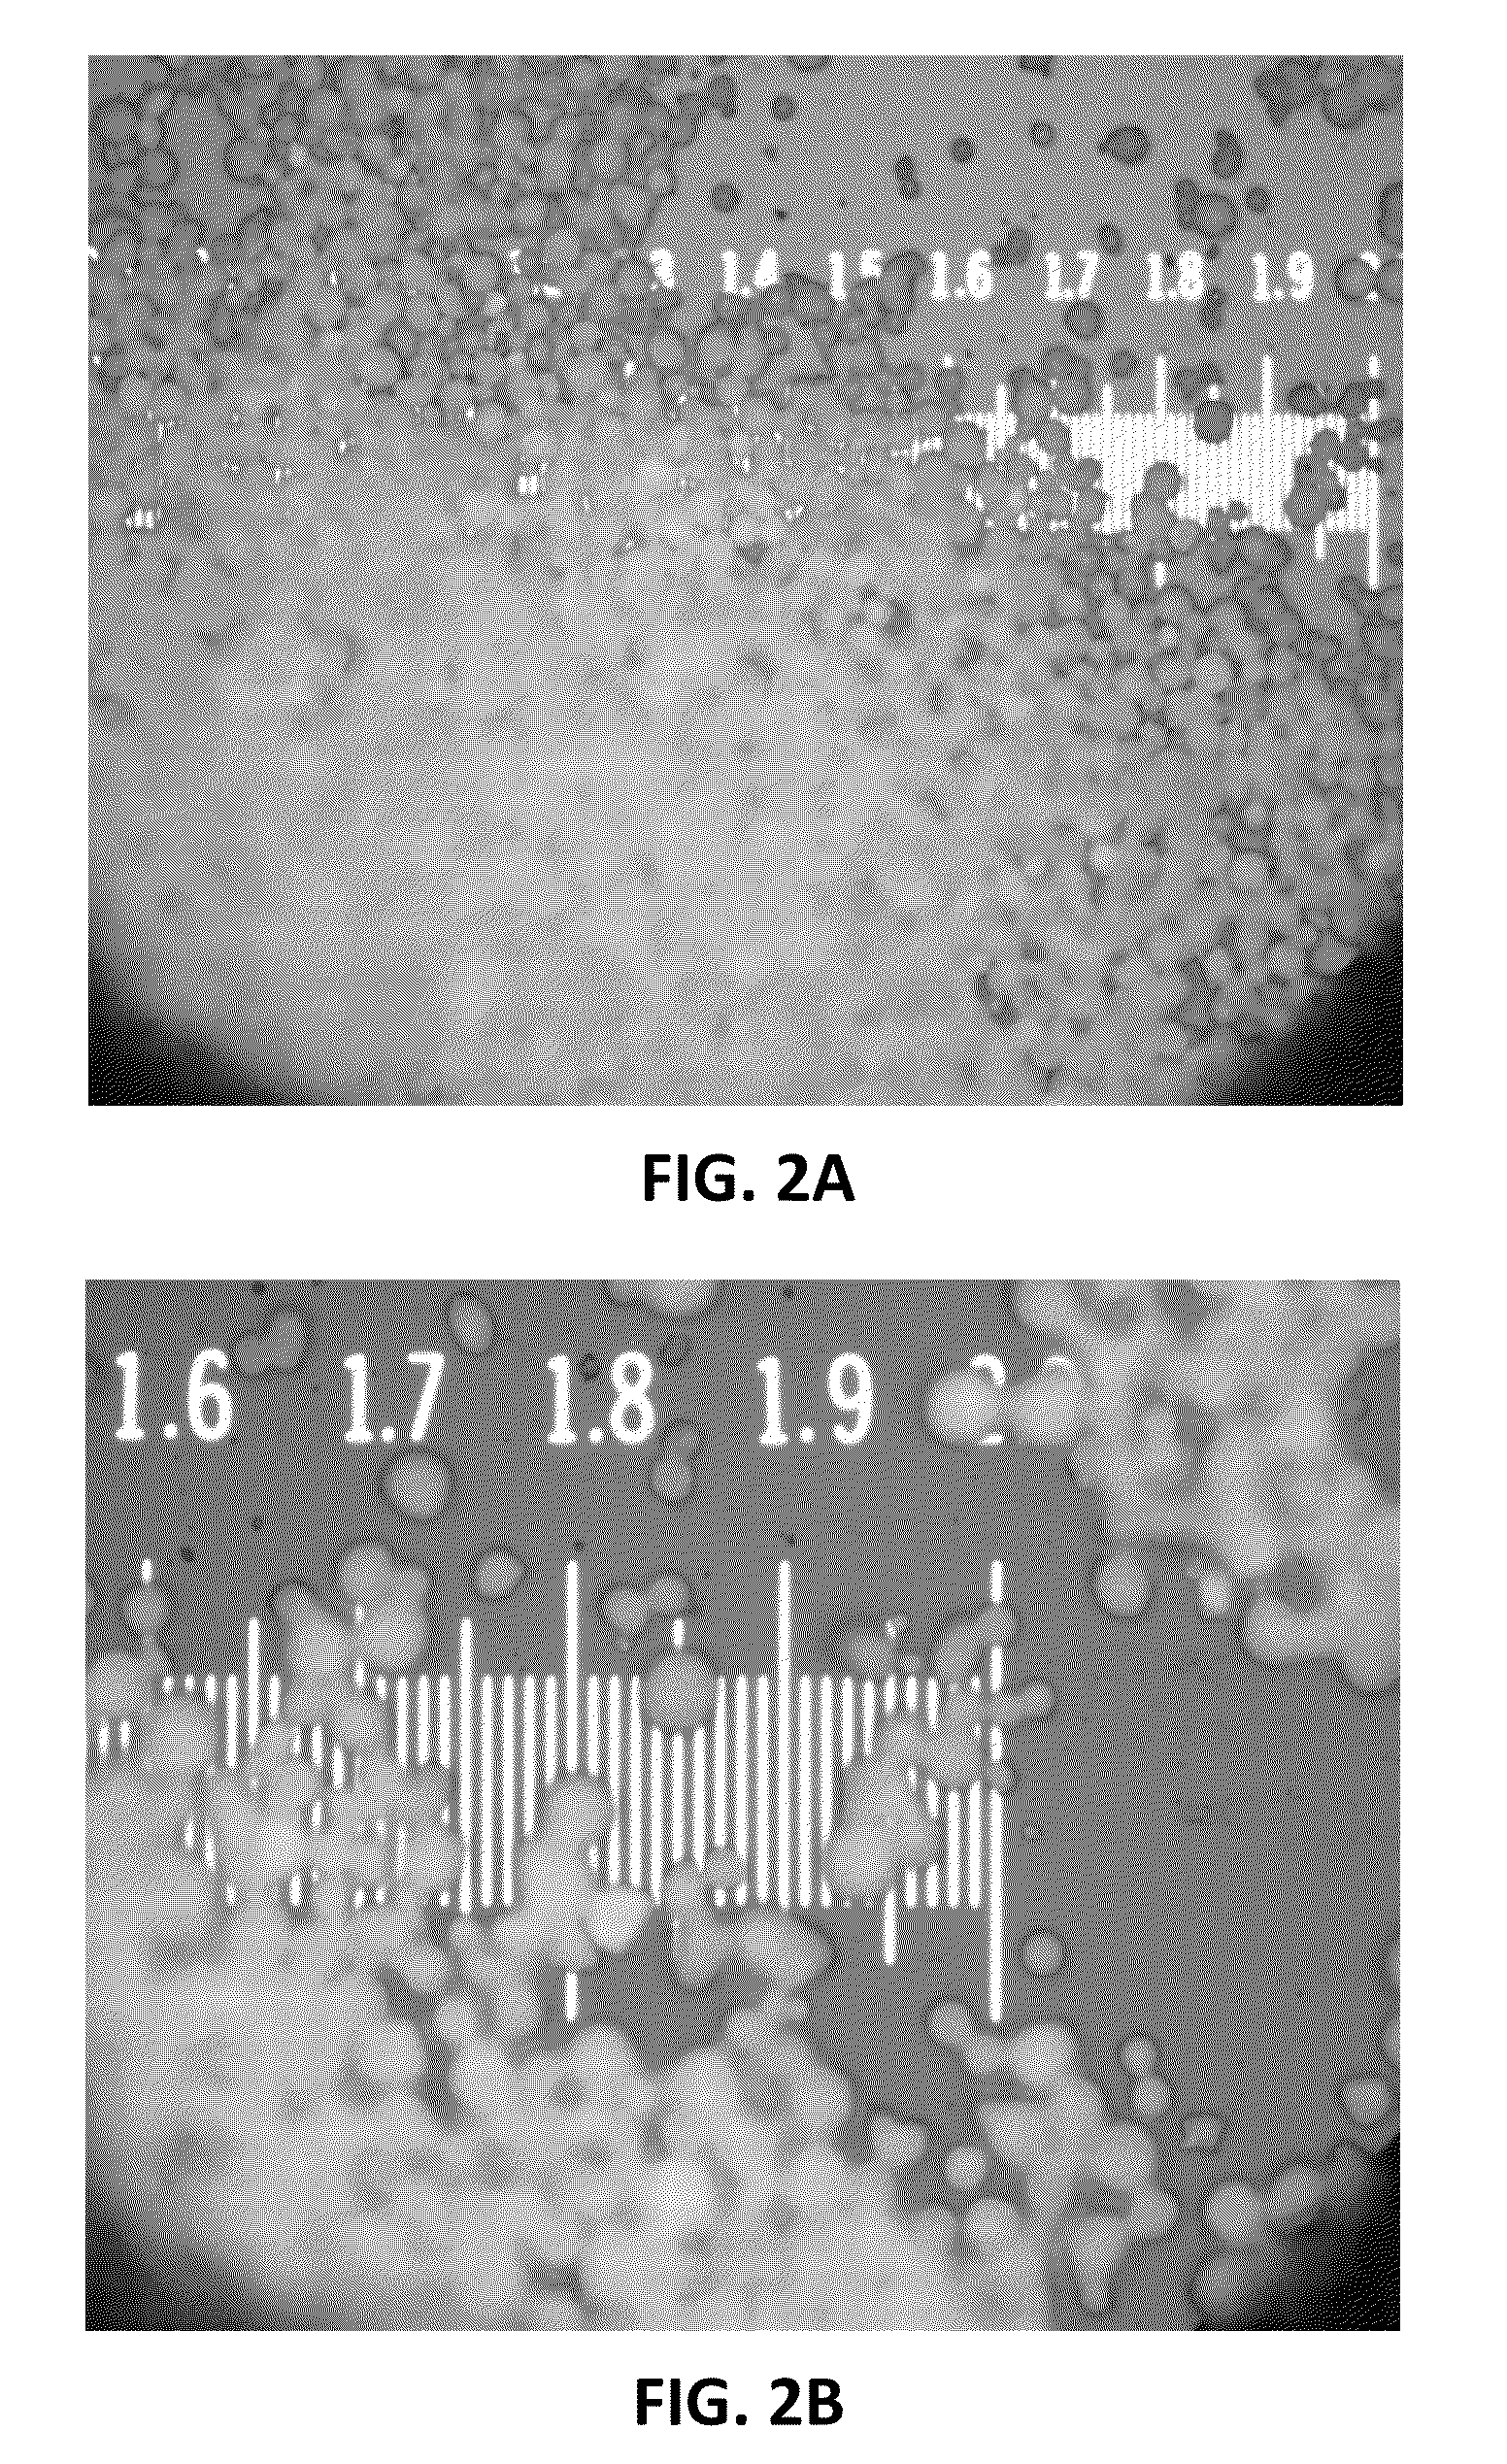 Method for densification and spheroidization of solid and solution precursor droplets of materials using microwave generated plasma processing